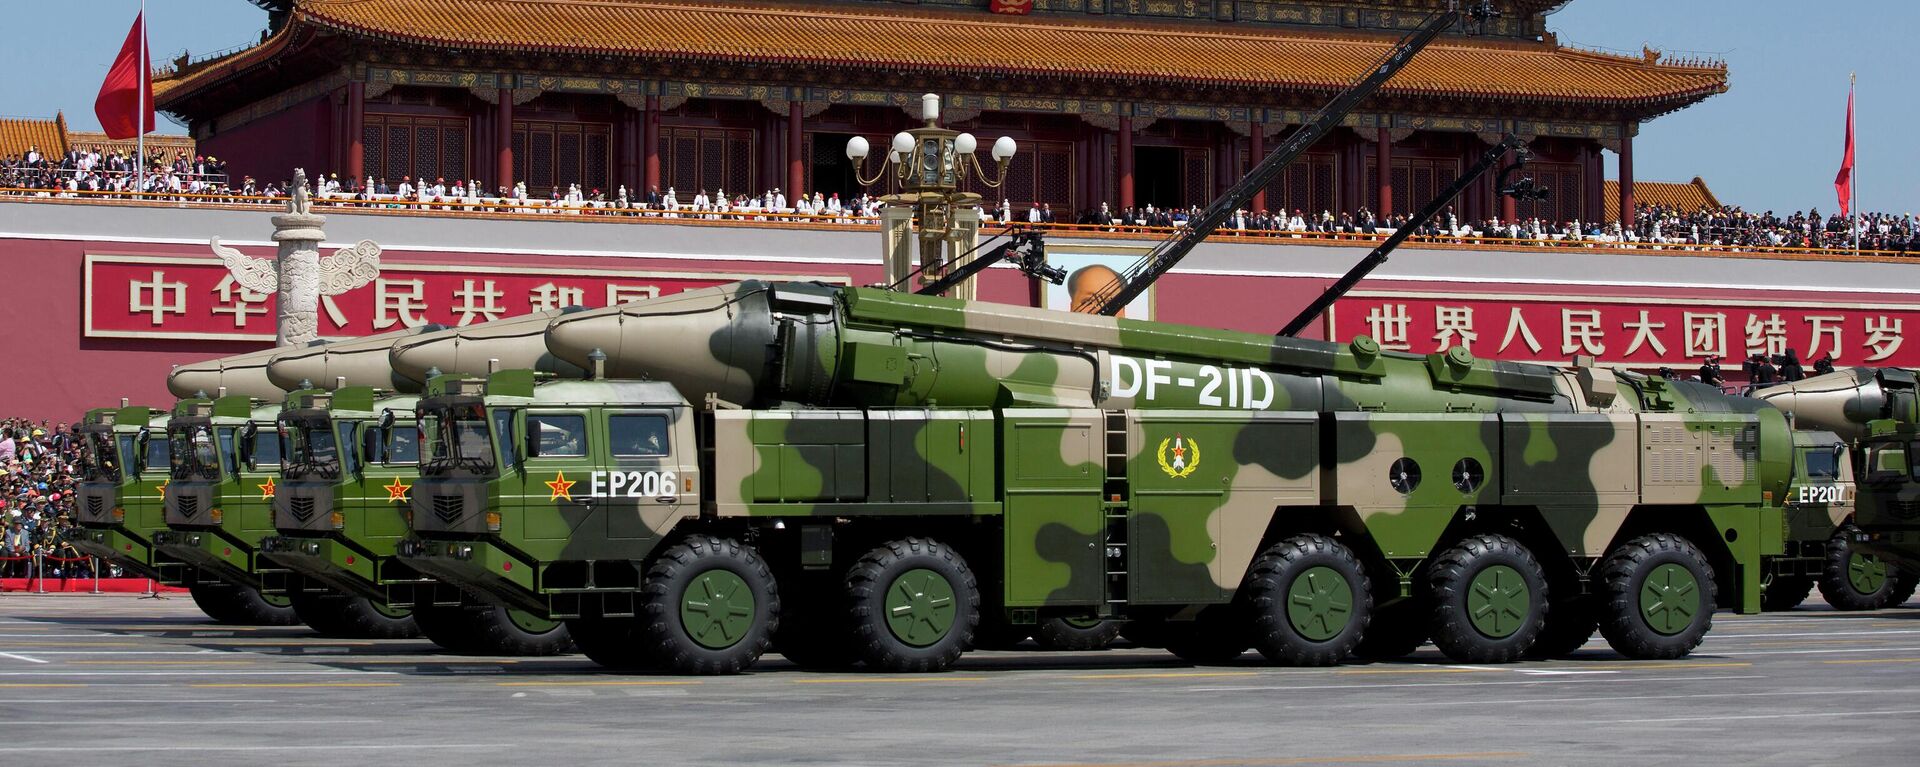 Chinese military vehicles carrying DF-21D anti-ship ballistic missiles, potentially capable of sinking a U.S. Nimitz-class aircraft carrier in a single strike, drive past Tiananmen Gate during a military parade to commemorate the 70th anniversary of the end of World War II, in Beijing on Sept. 3, 2015. - Sputnik International, 1920, 29.10.2022